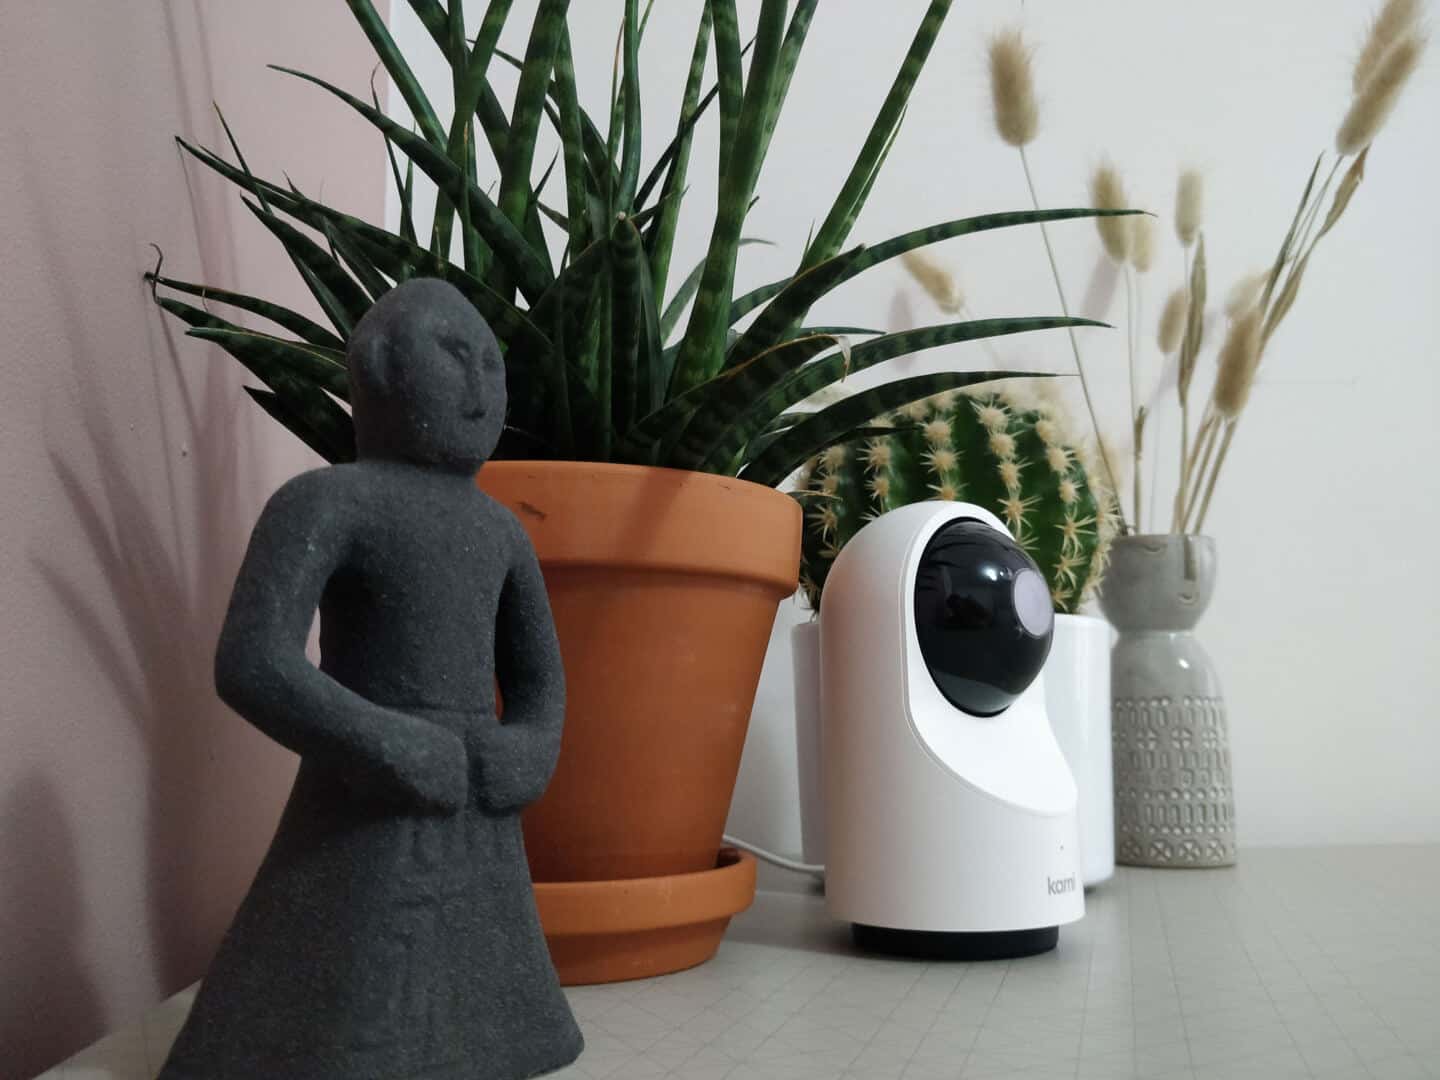 Kami indoor home security camera on a table between two plants and vase and a statue.